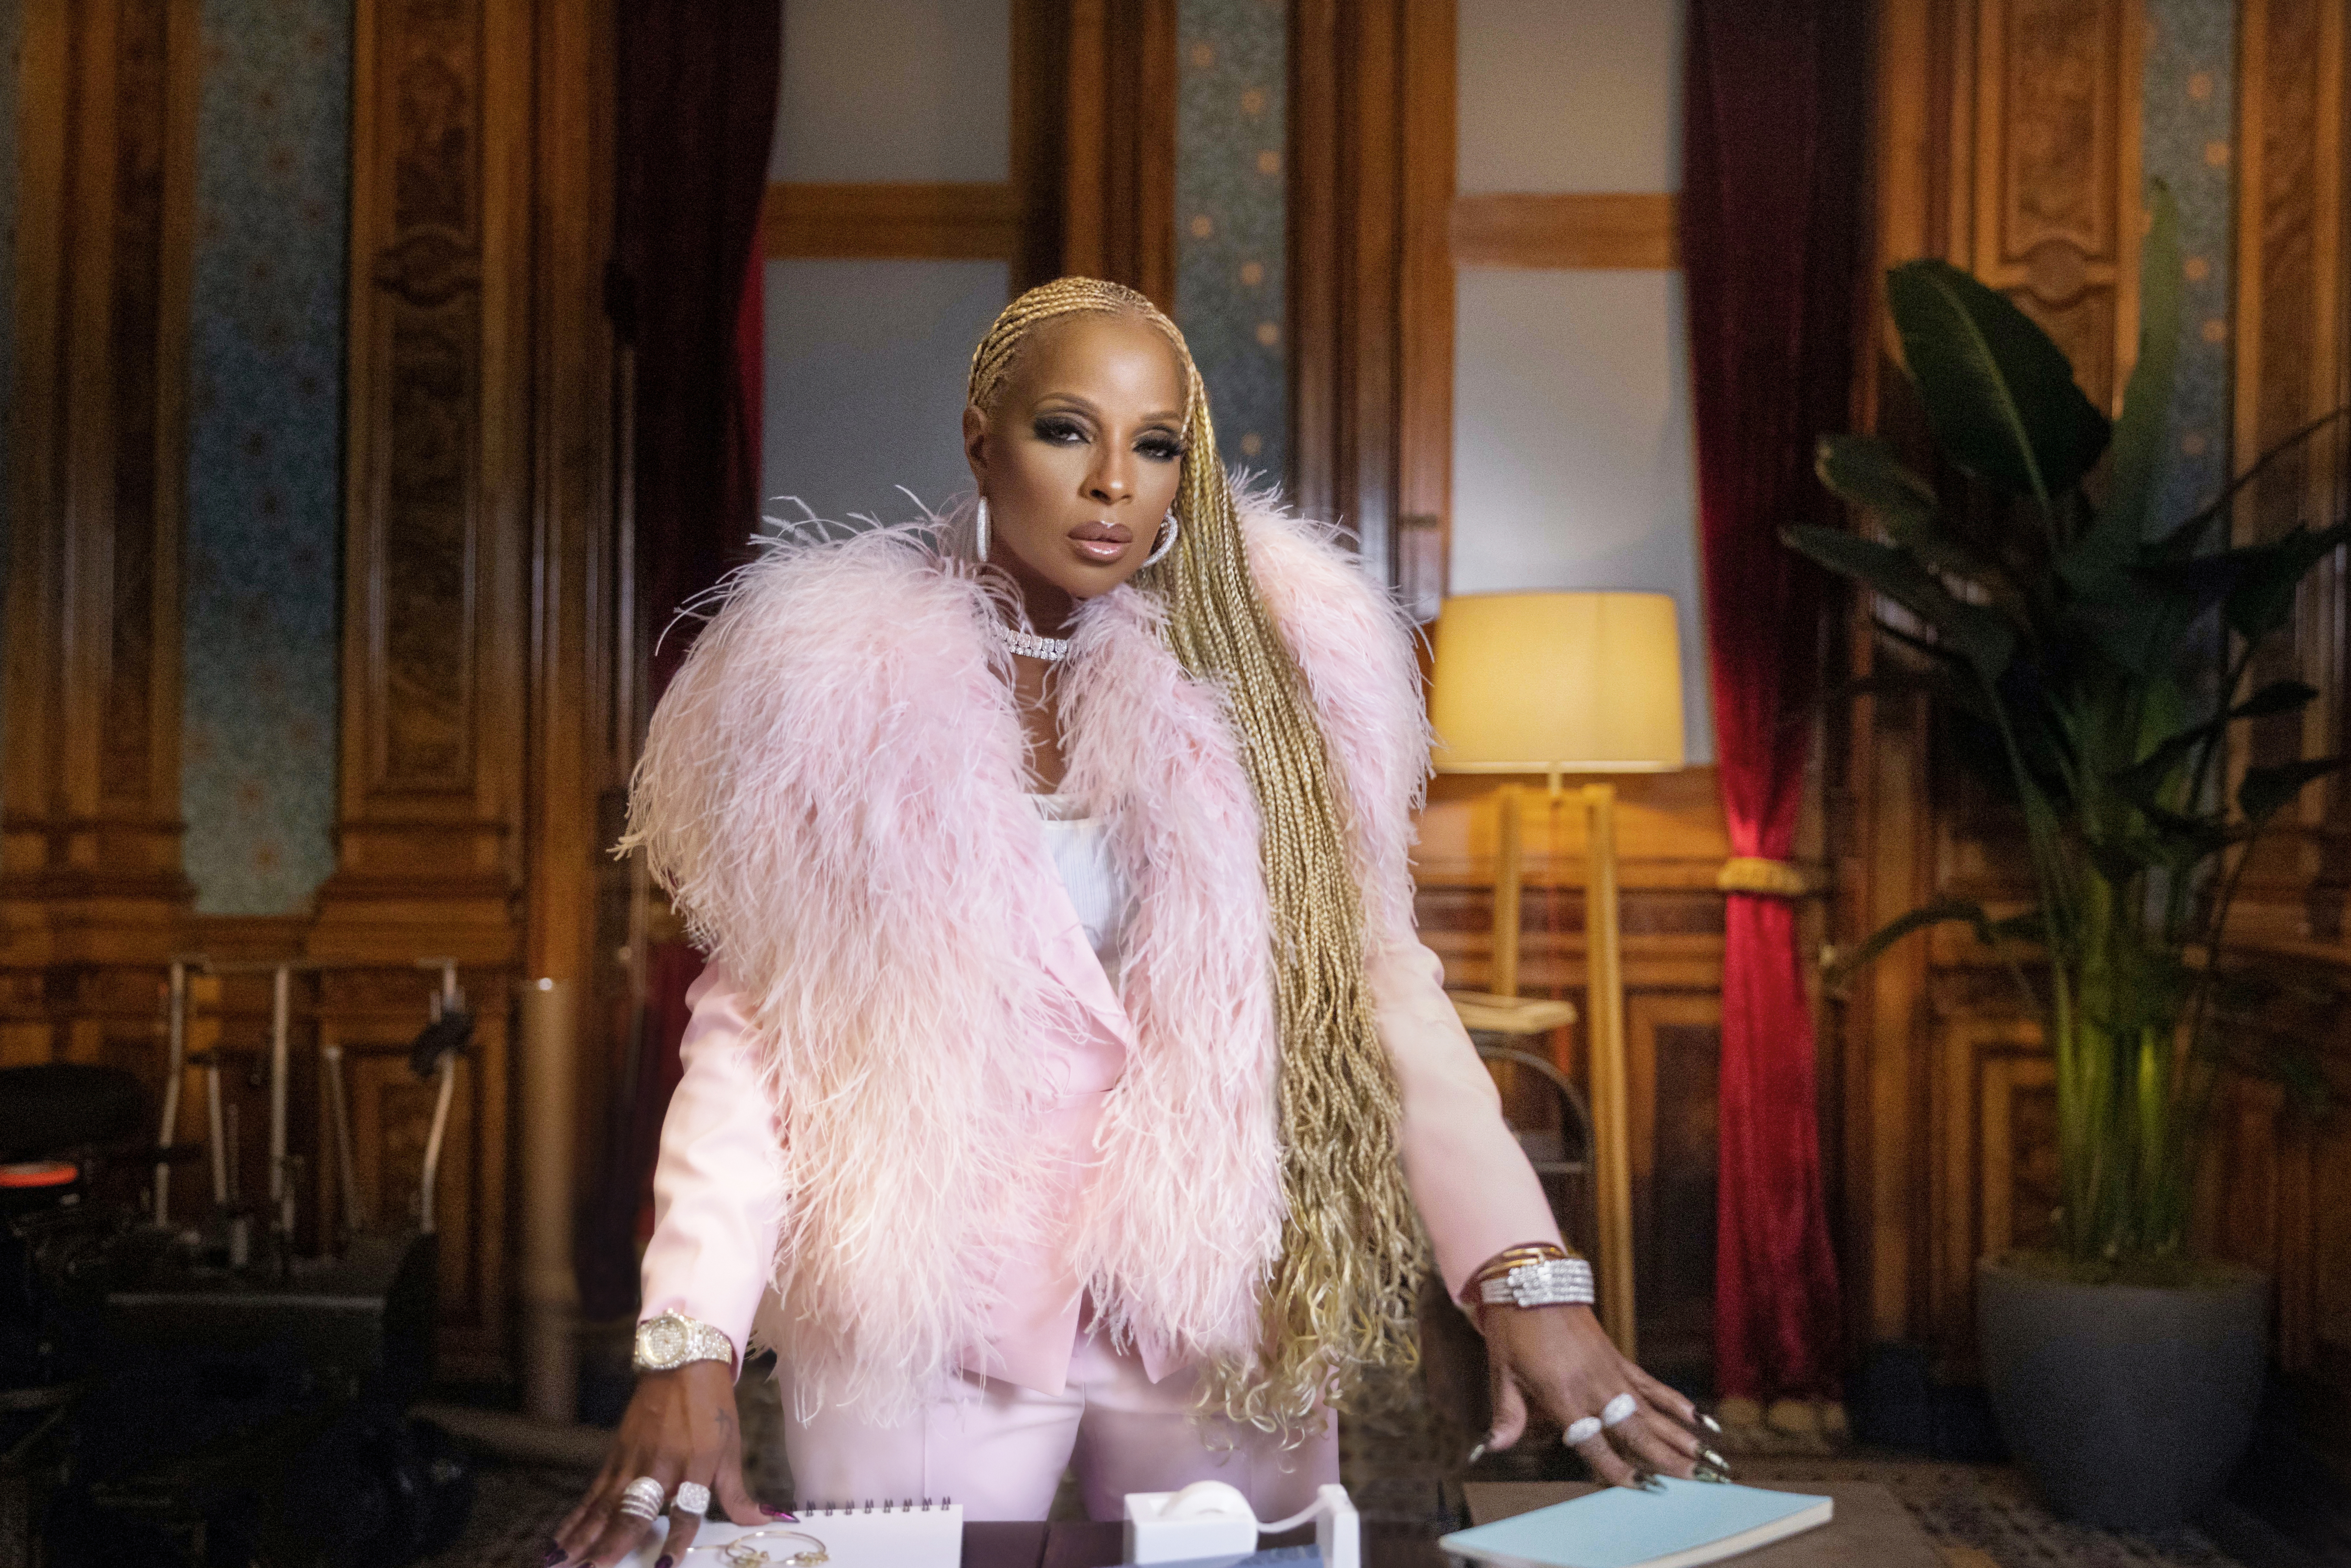 Mary J Blige stands at a table